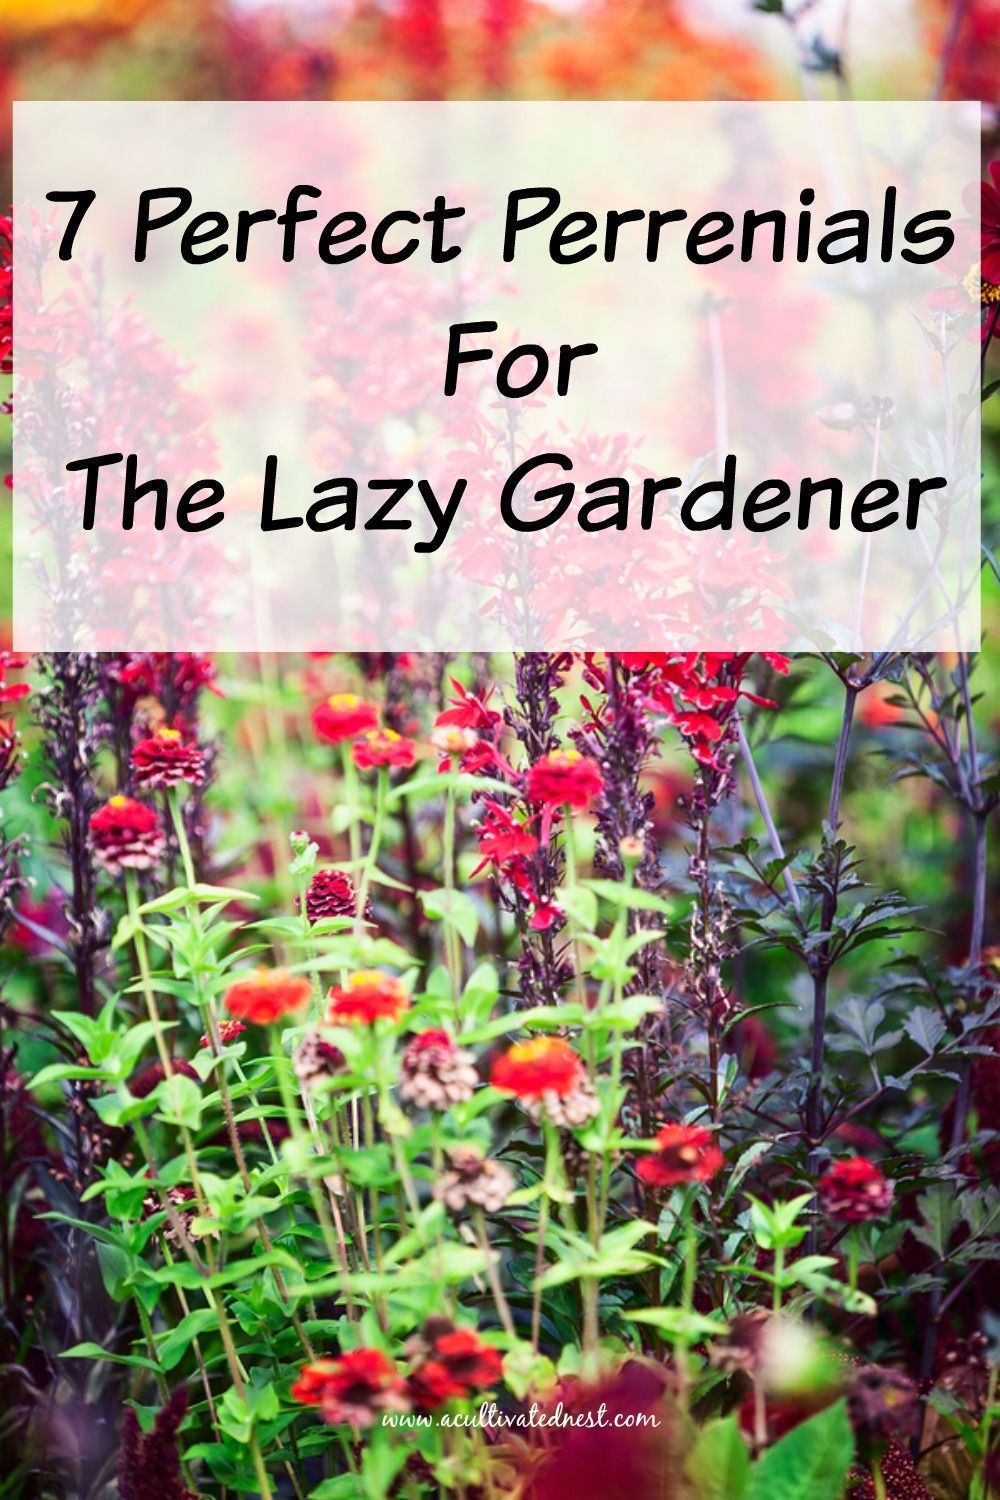 7 Perfect Perennials For The Lazy Gardener -   18 plants Outdoor ideas